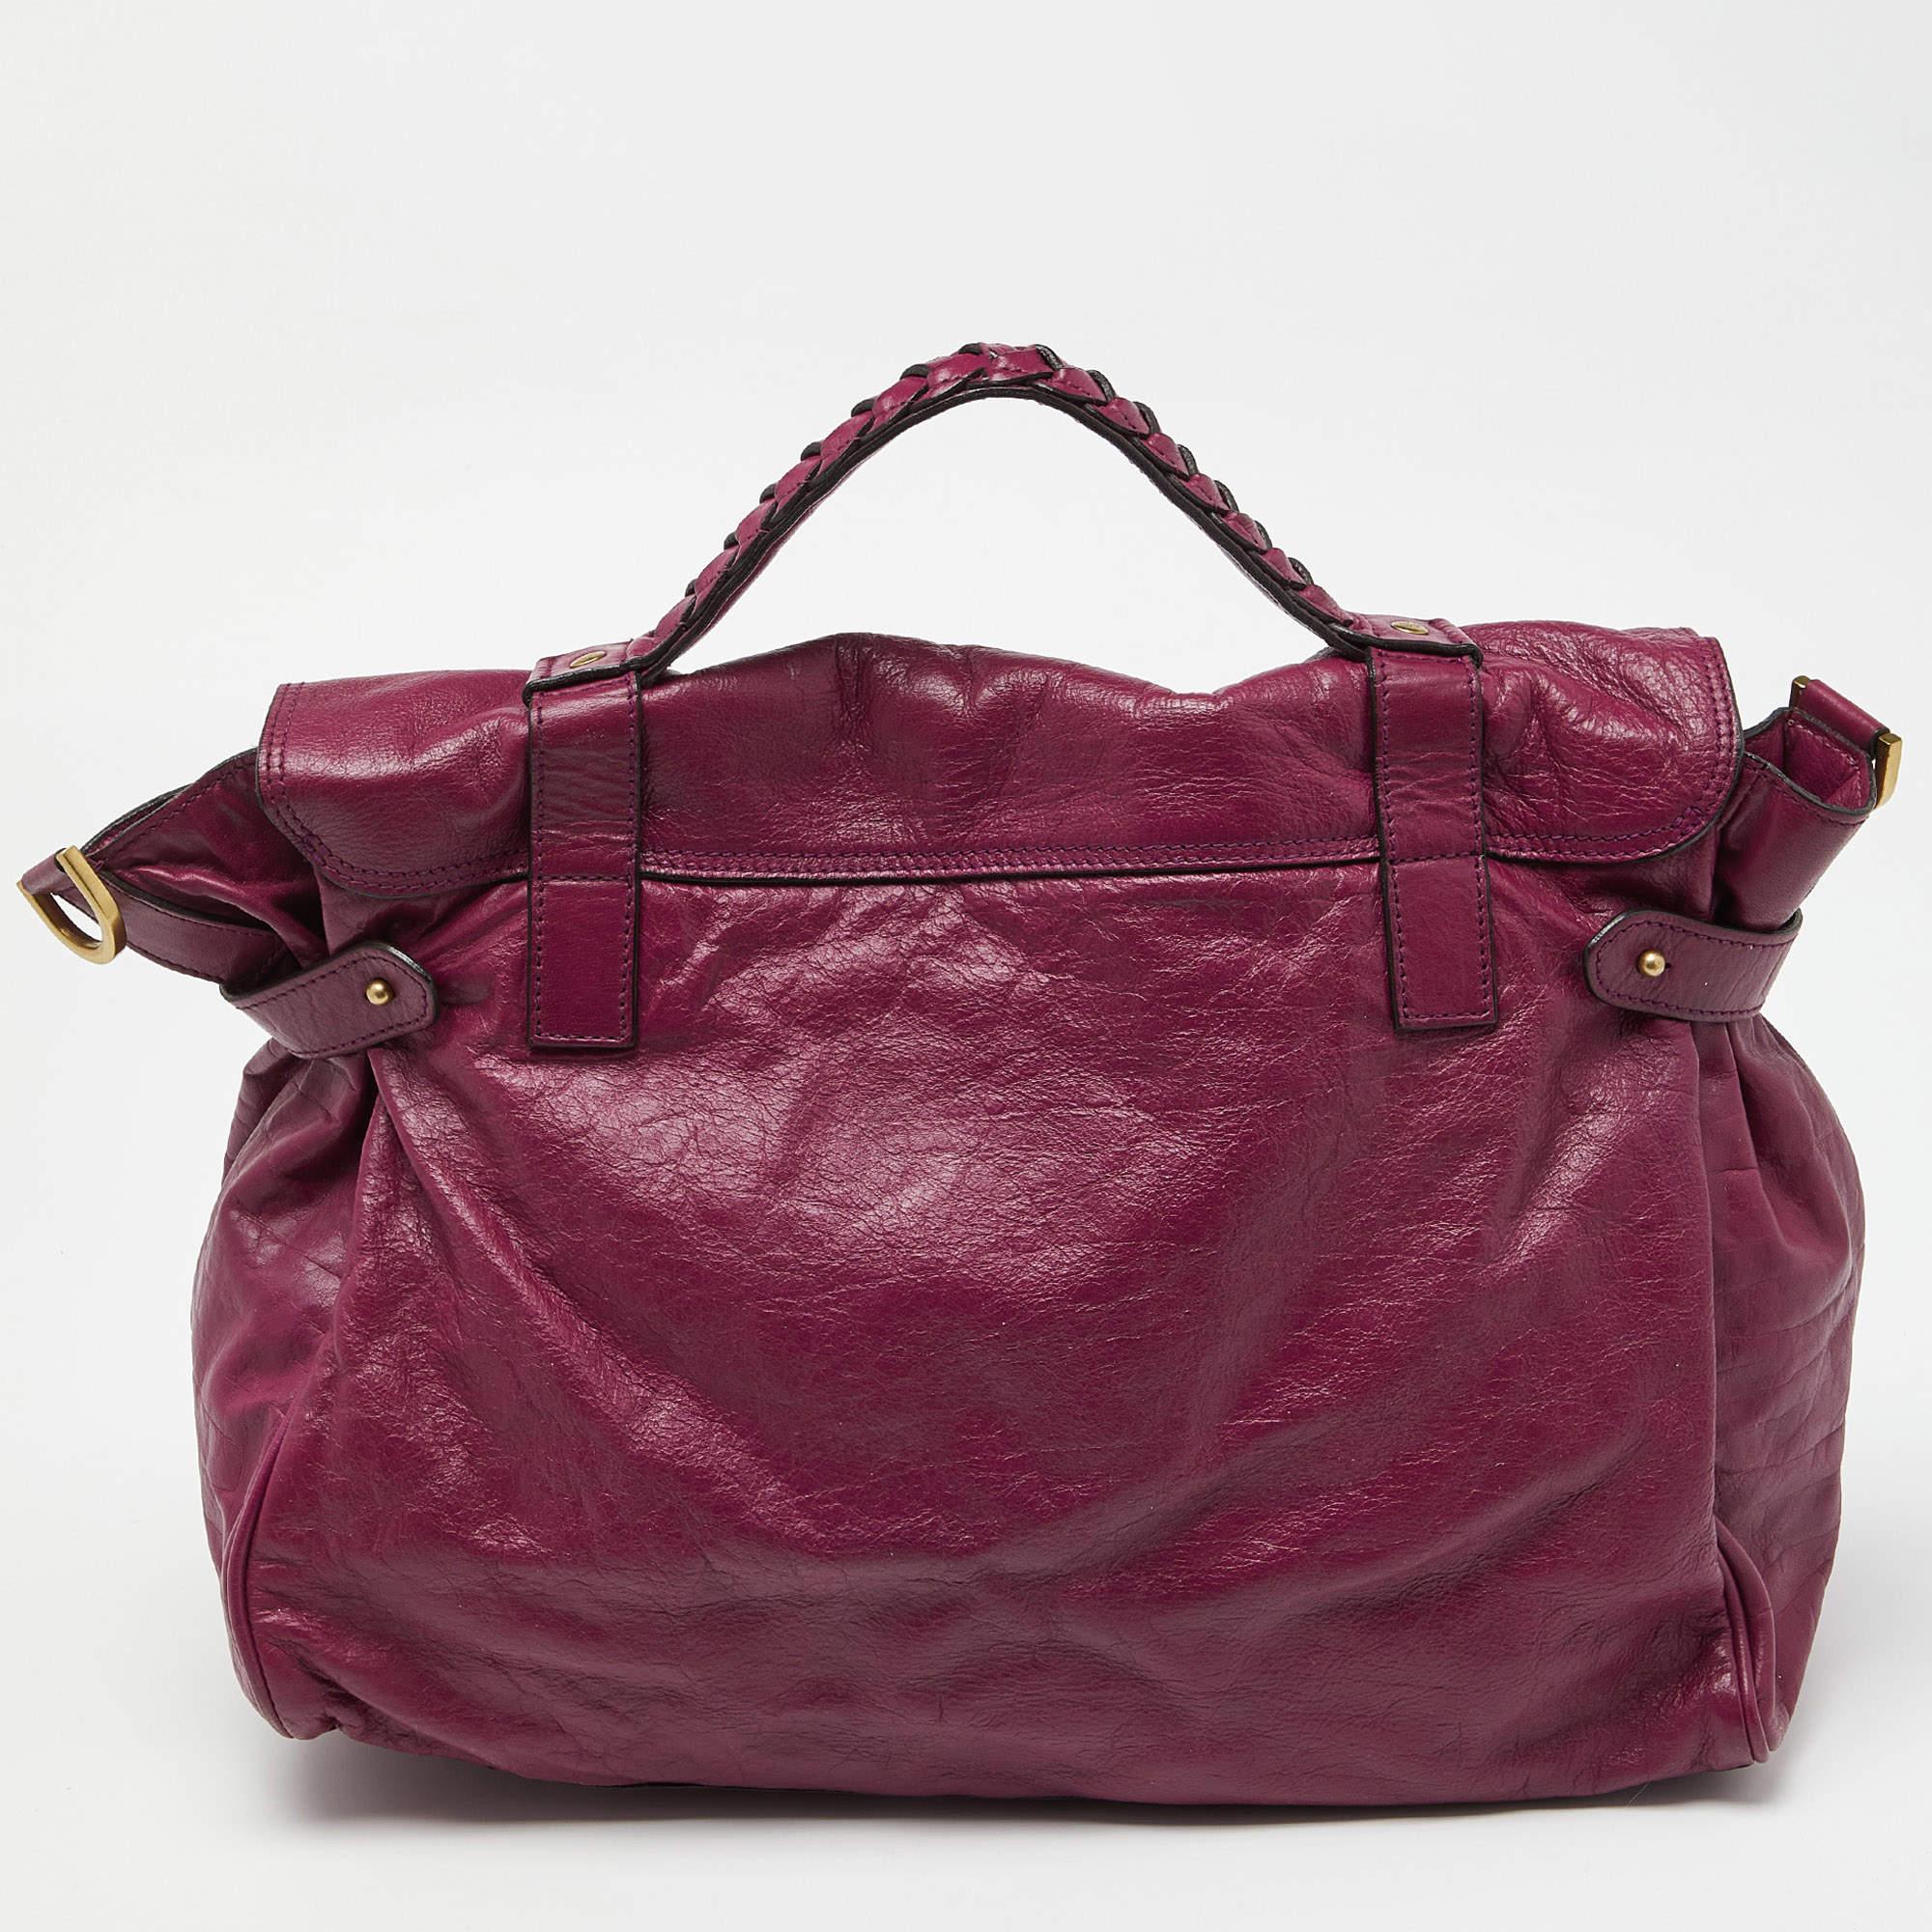 The simple silhouette and the use of durable materials for the exterior bring out the appeal of this Mulberry Alexa satchel for women. It features comfortable handles and a well-lined interior.

